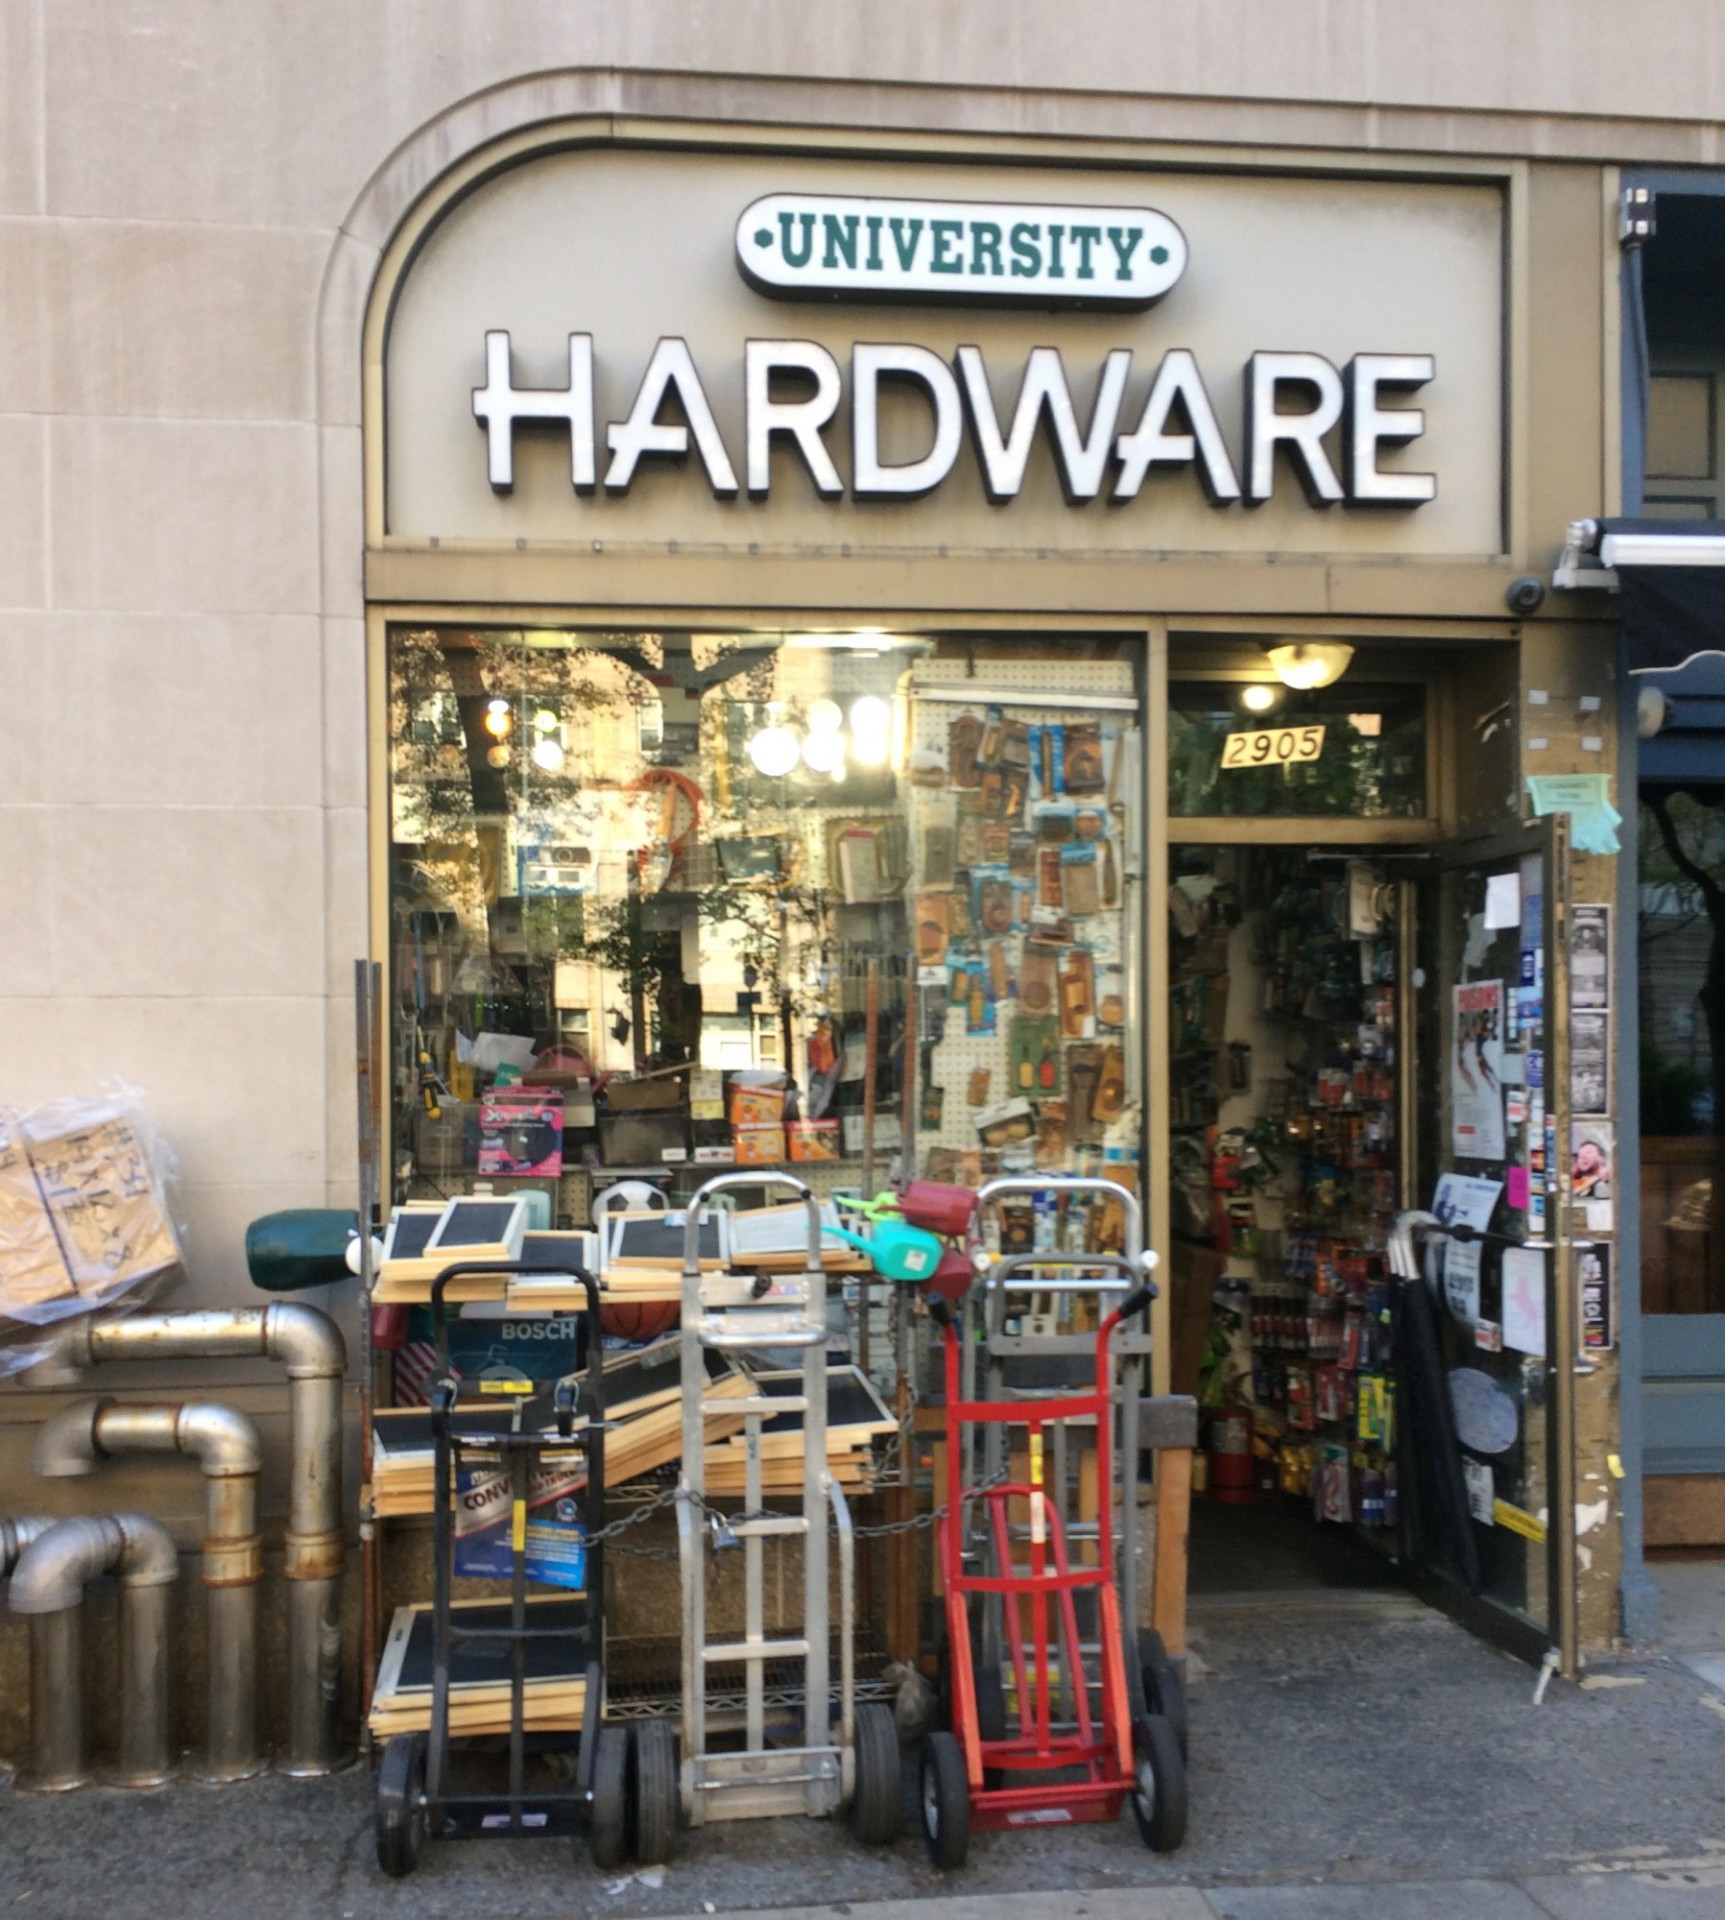  University Housewares, and its sister store University Hardware, are consolidating to a new, larger location across Broadway beginning in July.